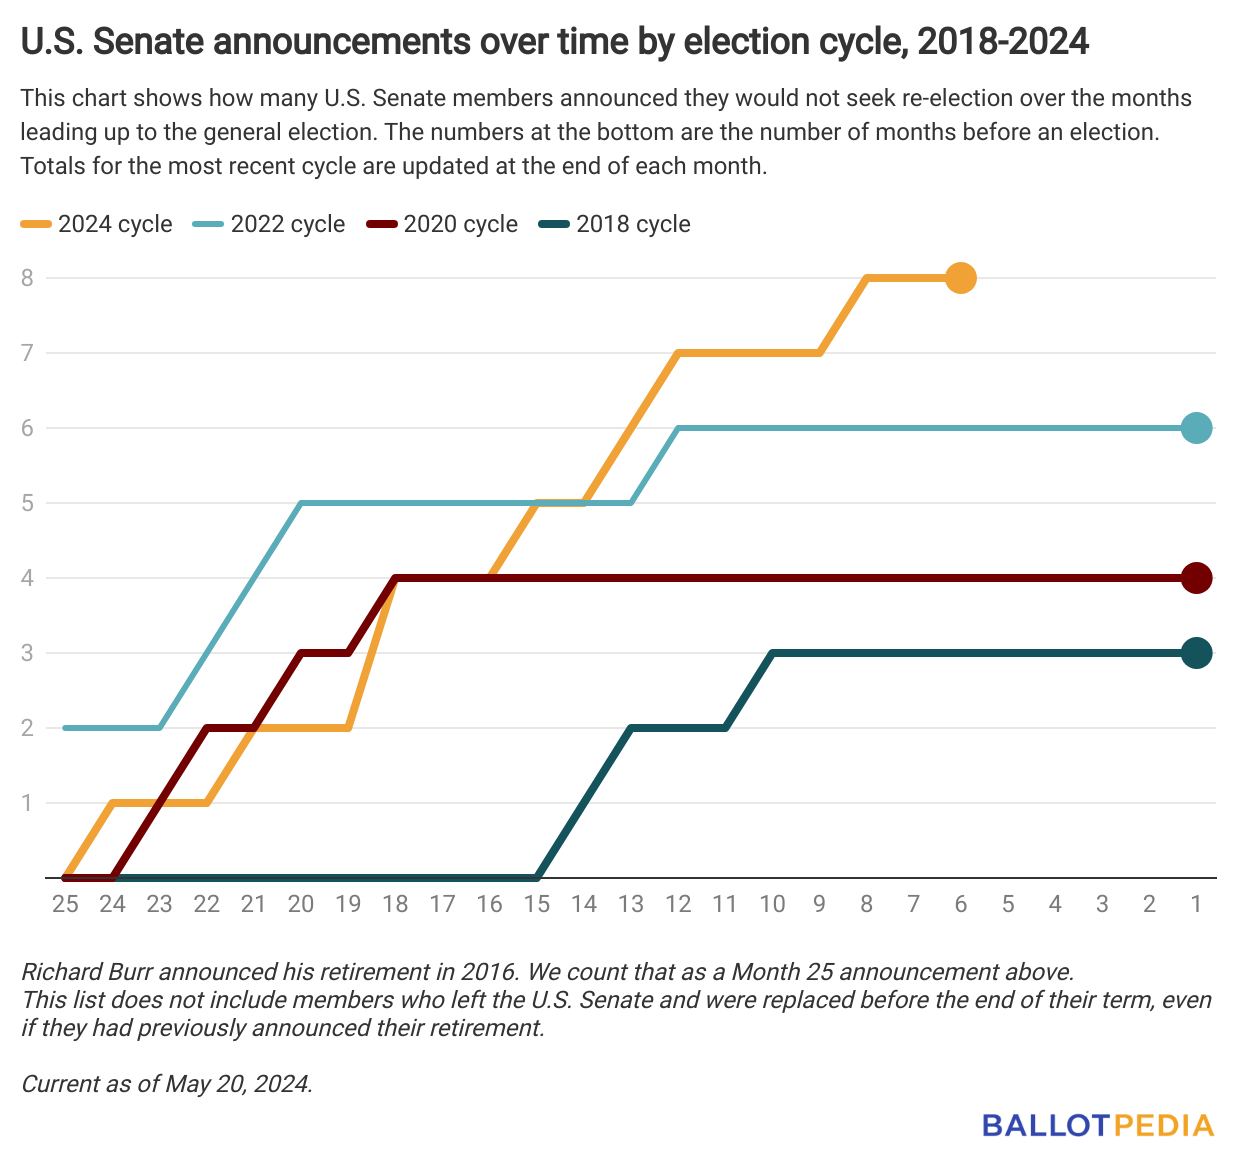 graph showing U.S. Senate announcements over time by election cycle 2018-2024.